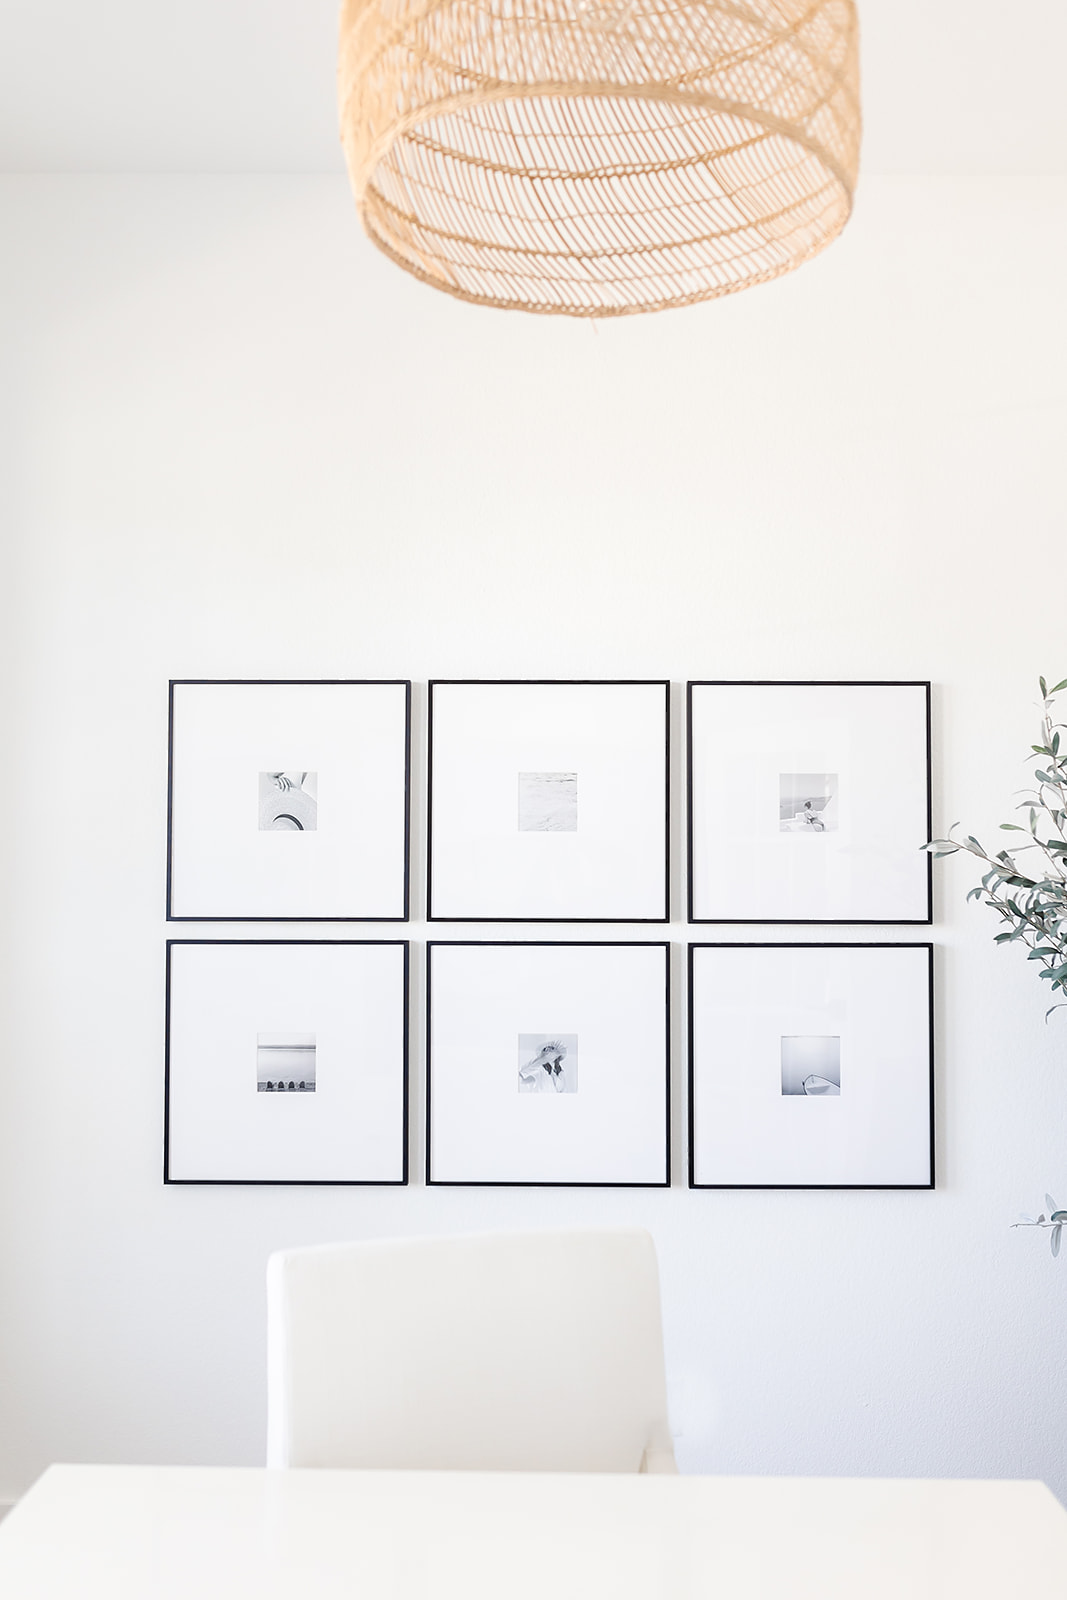 Picture Frame Arrangements: A dinging room of a simple grid display